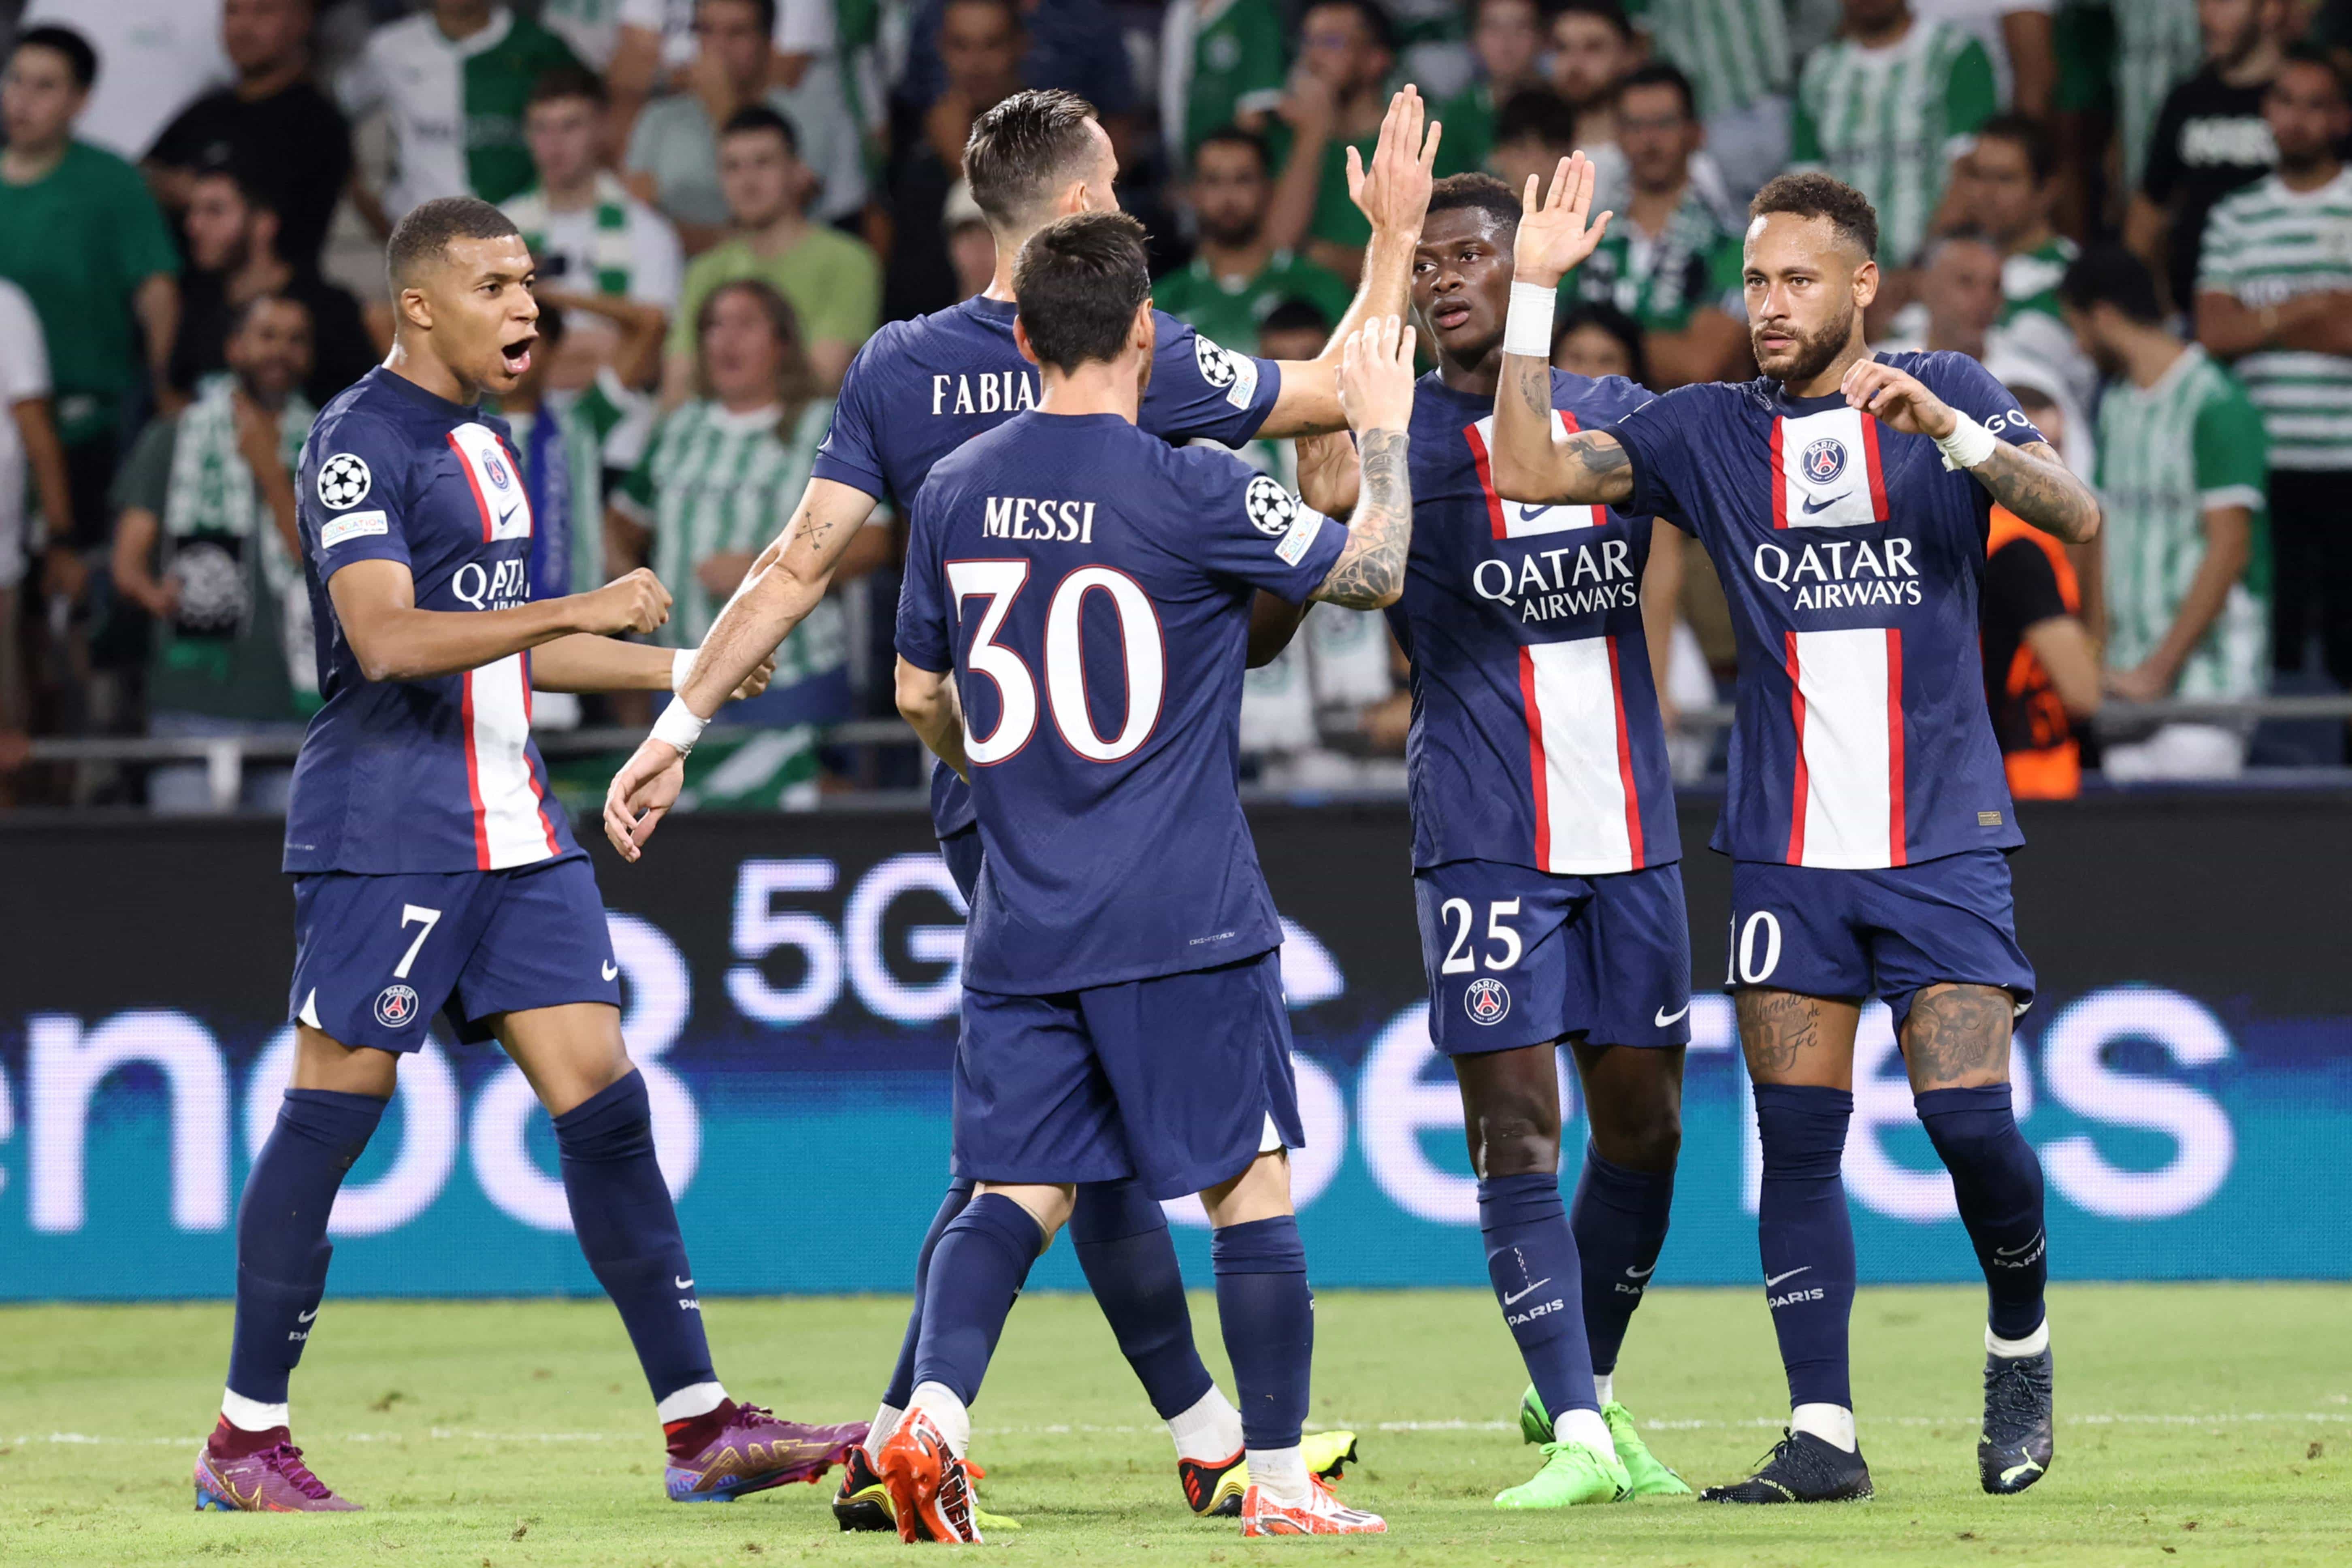 PSG’s superstars overcame a scare